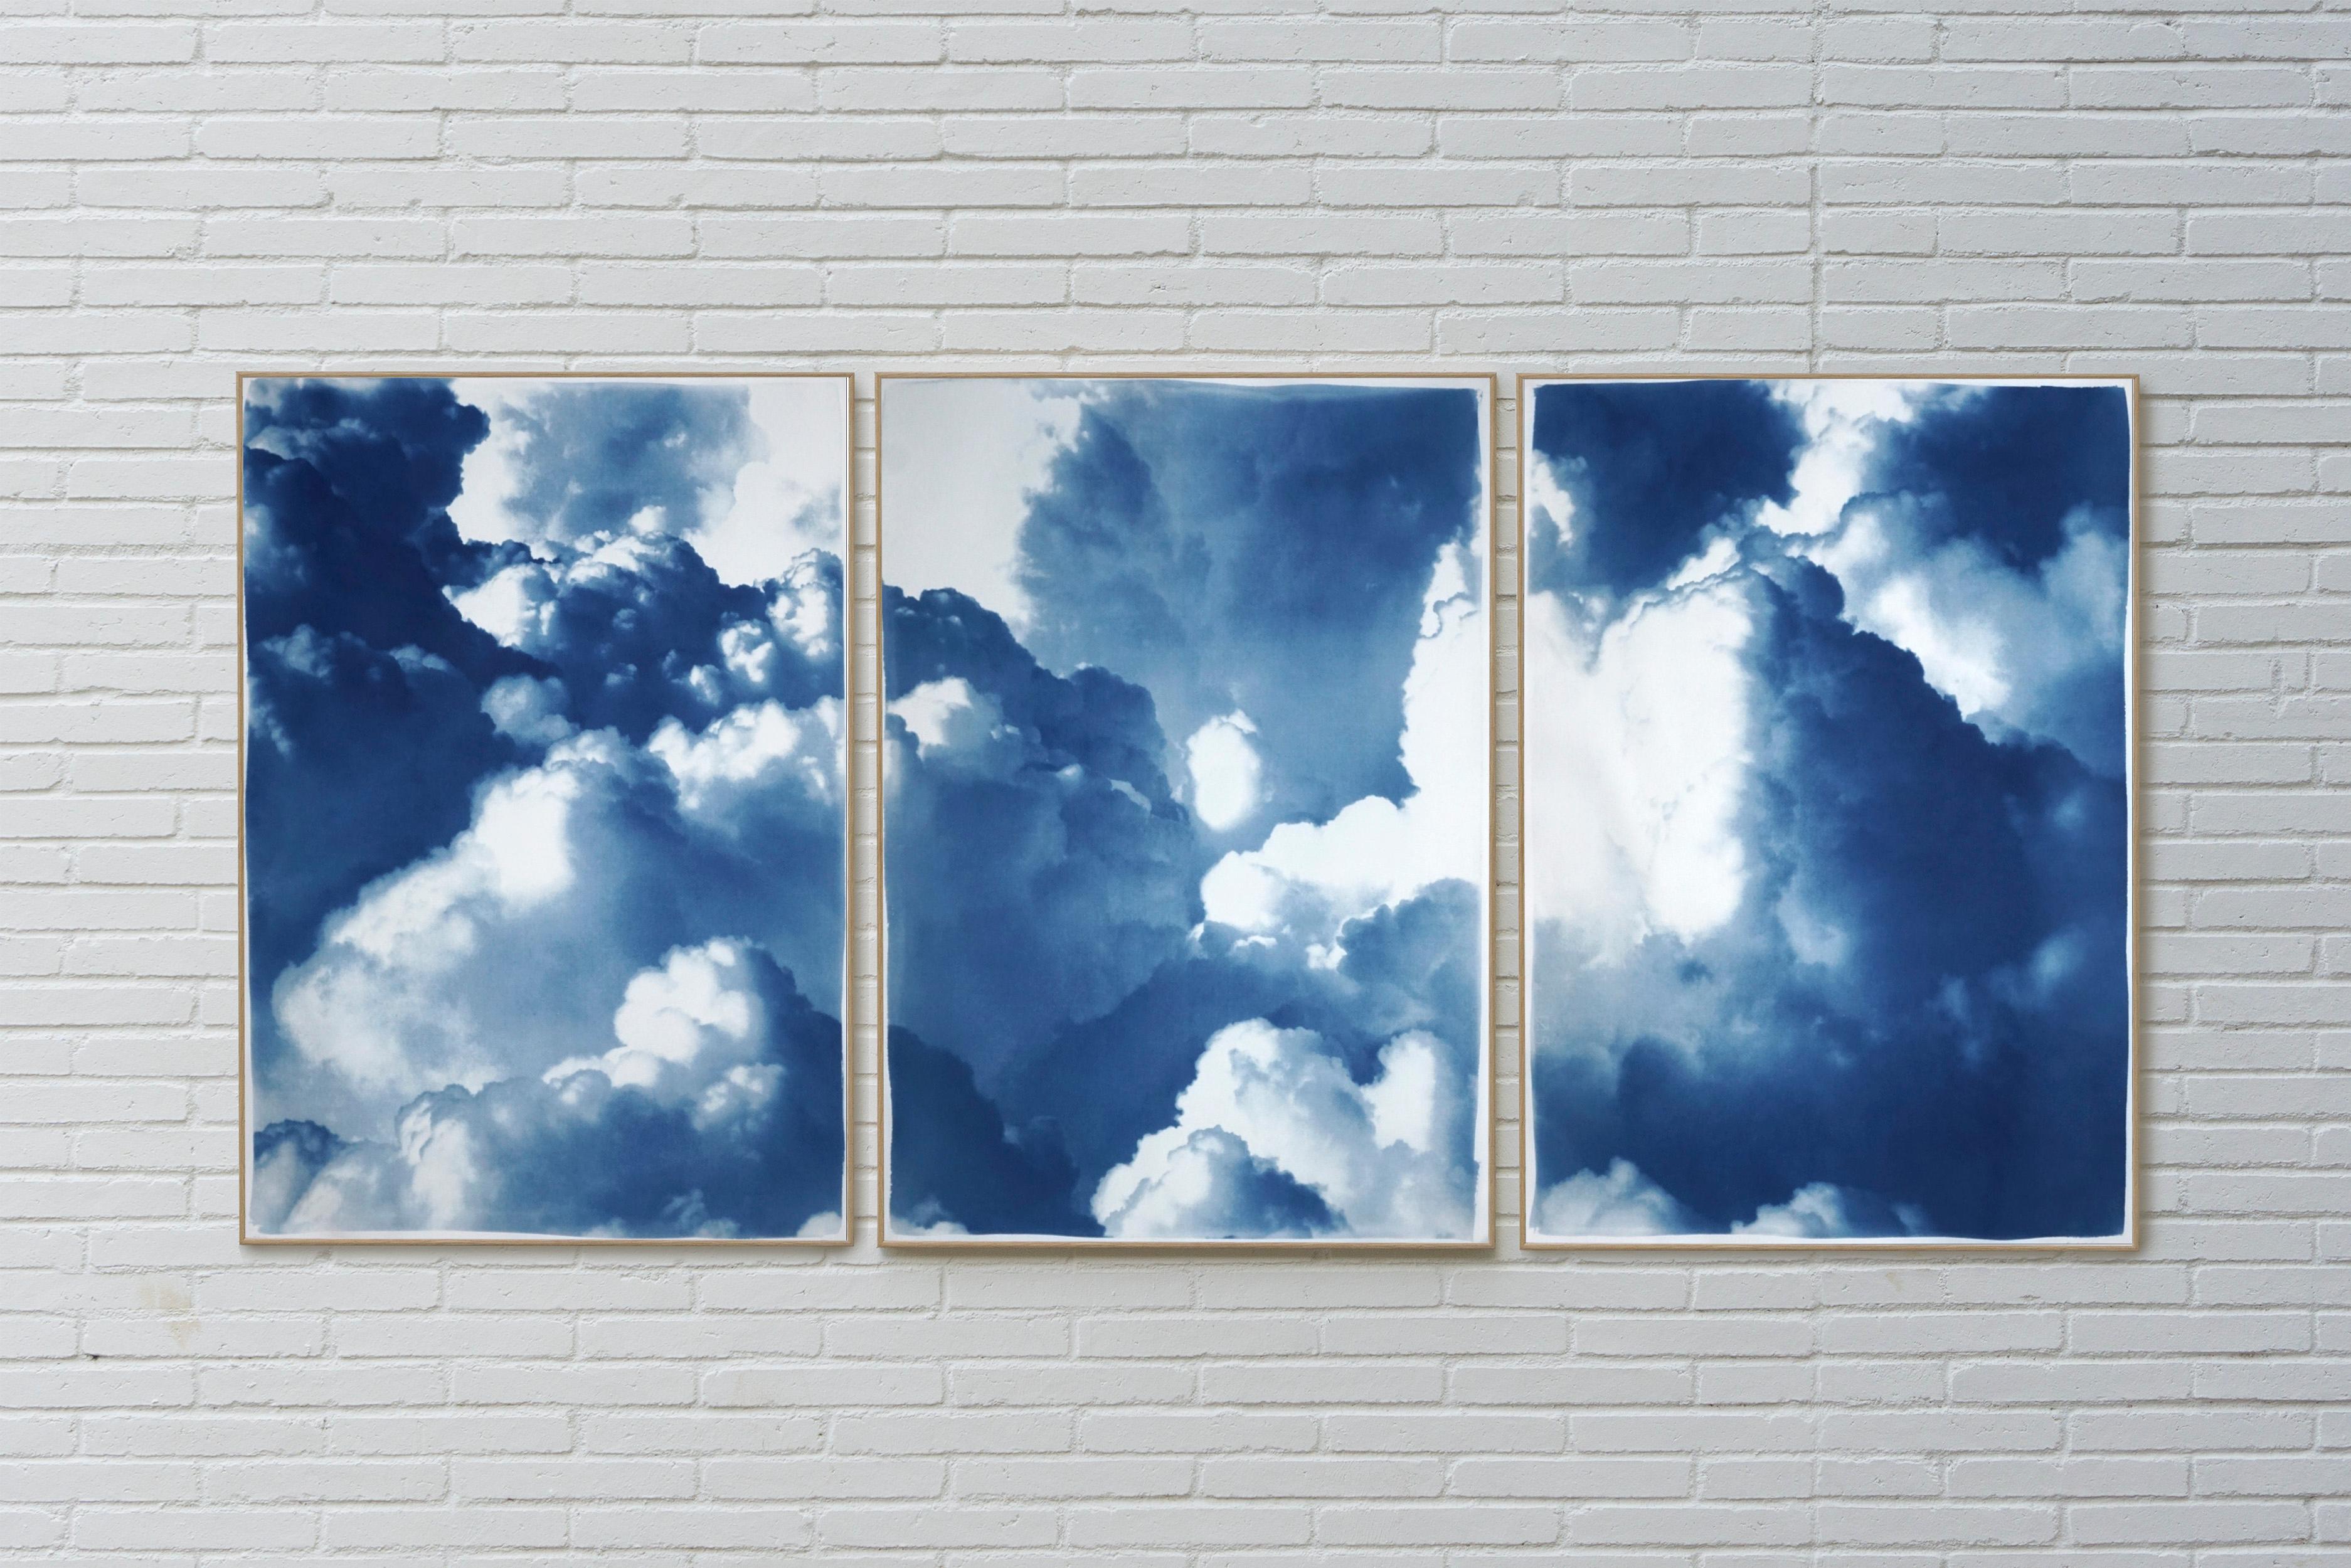 Dense Rolling Clouds, Blue Sky Landscape Triptych, Handmade Cyanotype on Paper - Naturalistic Painting by Kind of Cyan